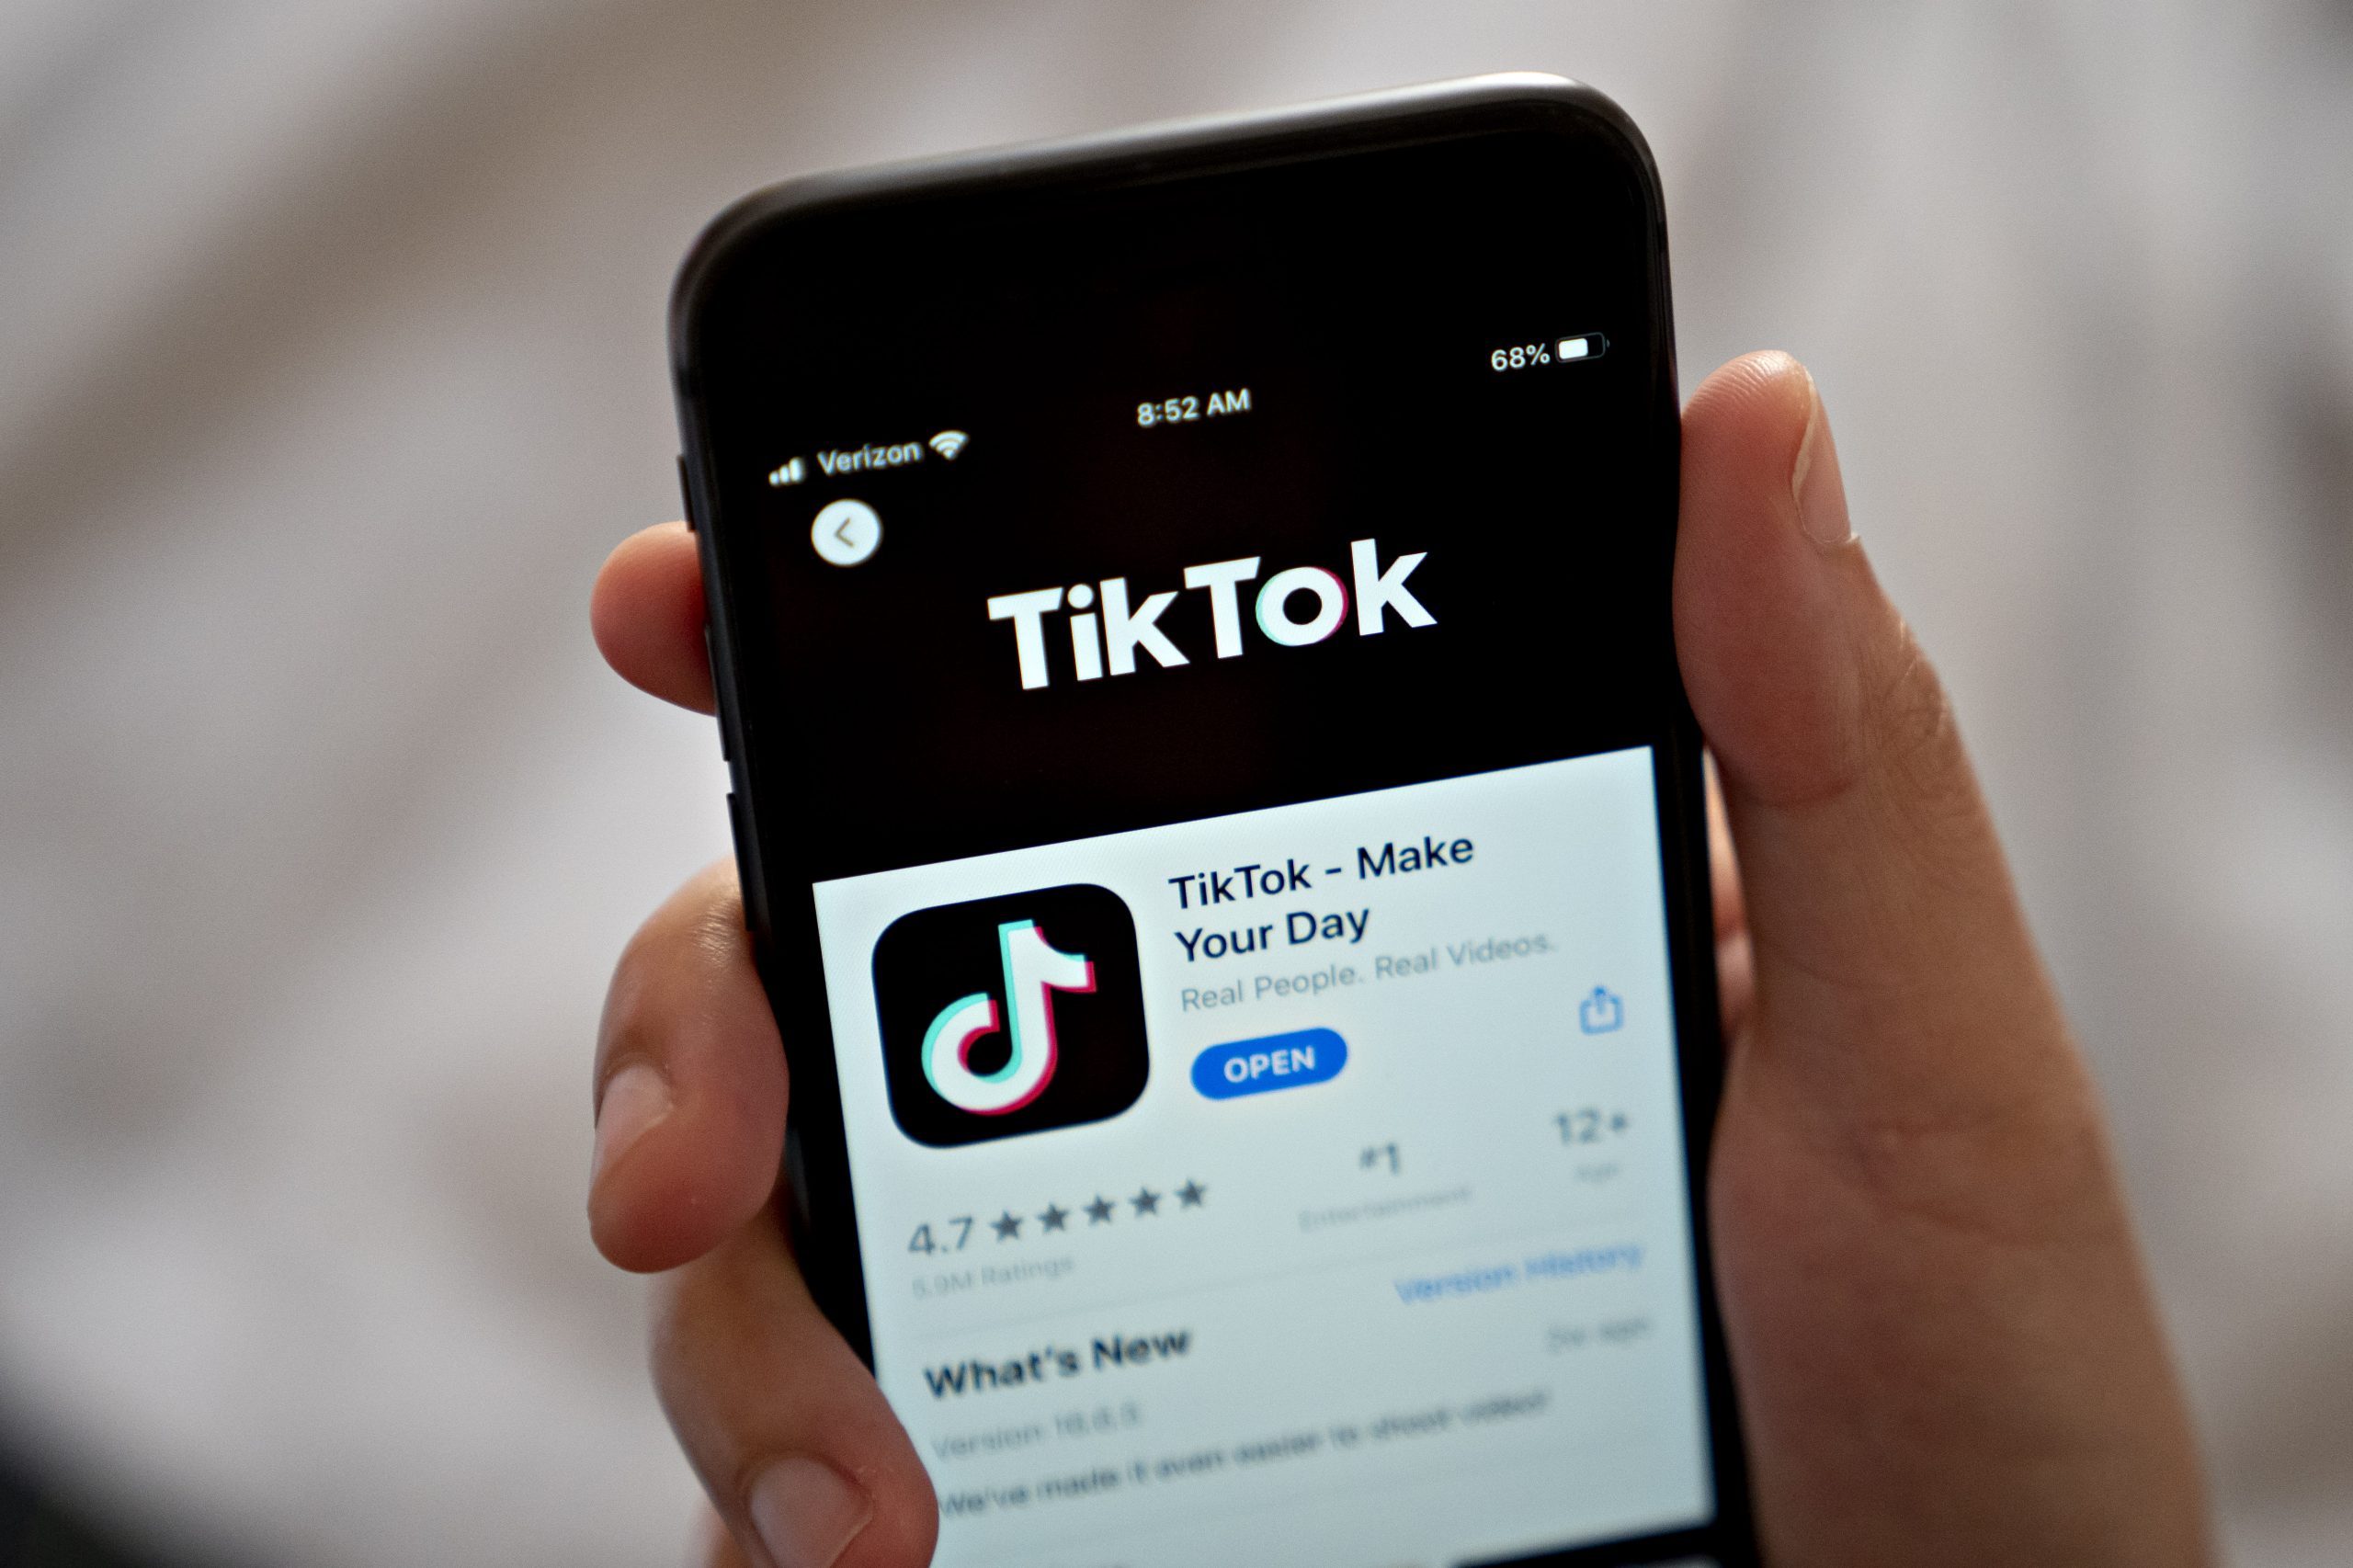 TikTok’s latest safety update allows parents to control their kids’ accounts